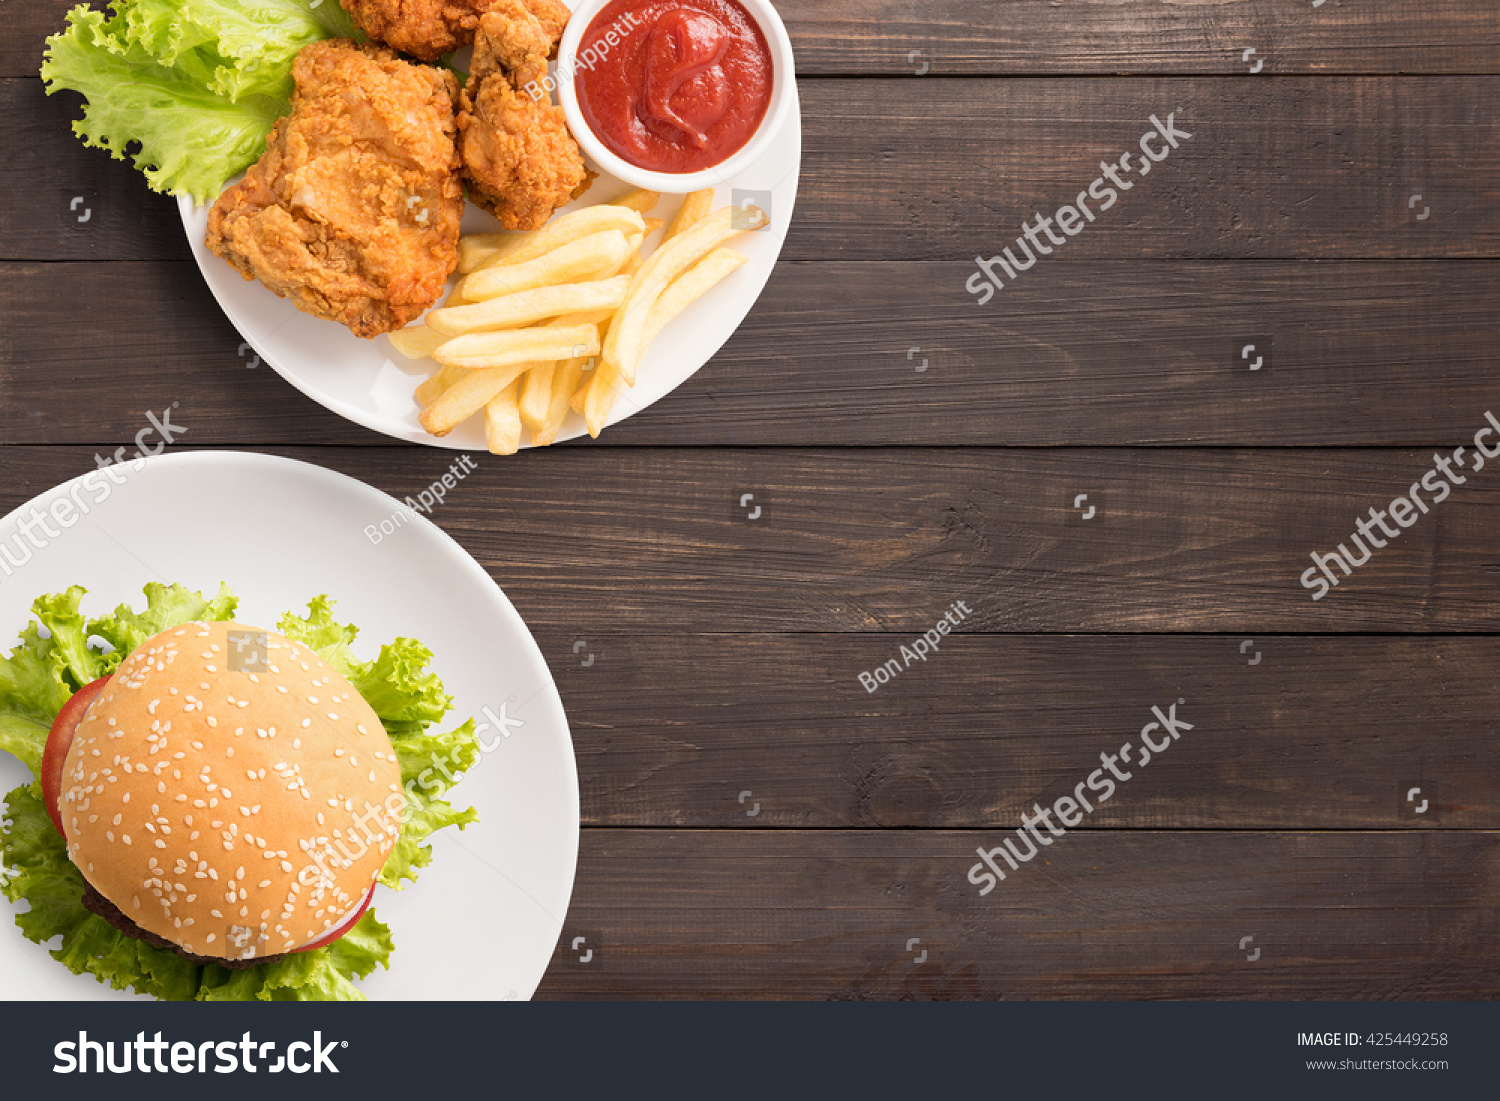 Fast food big hamburger on wooden background. Fast food set fried chicken and french fries. Take away fast food.  #425449258